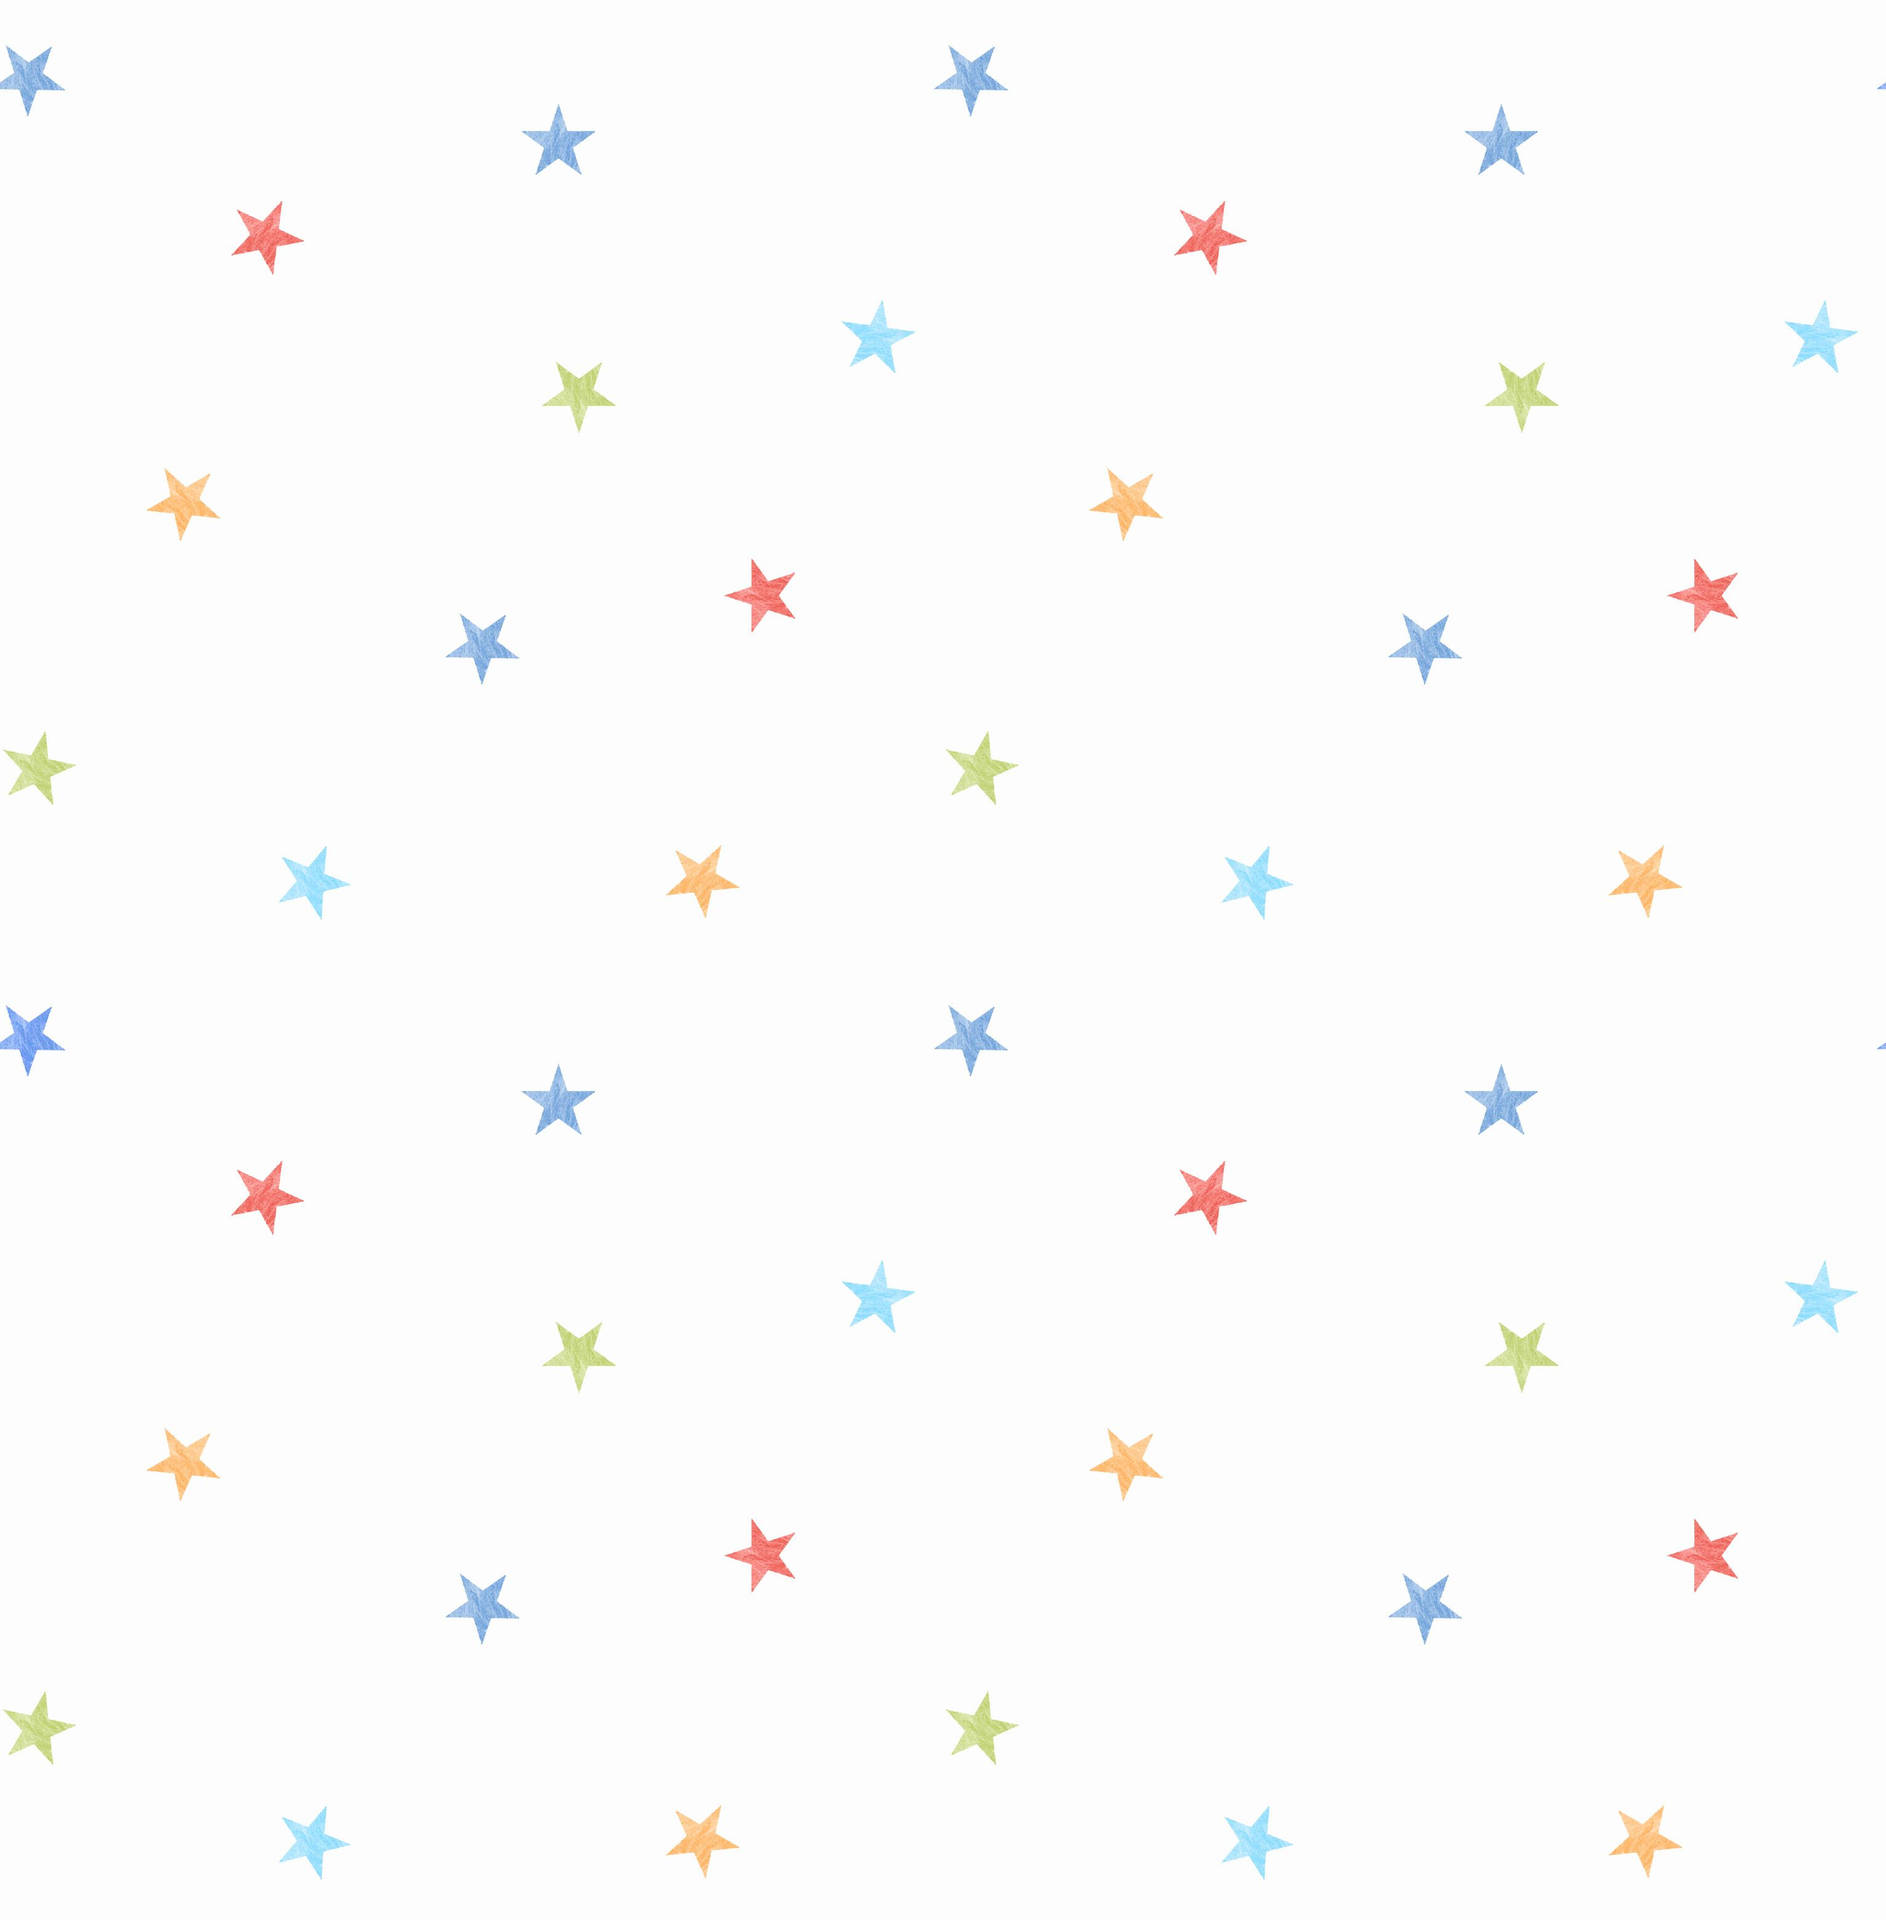 A Colorful Star Pattern On White Background